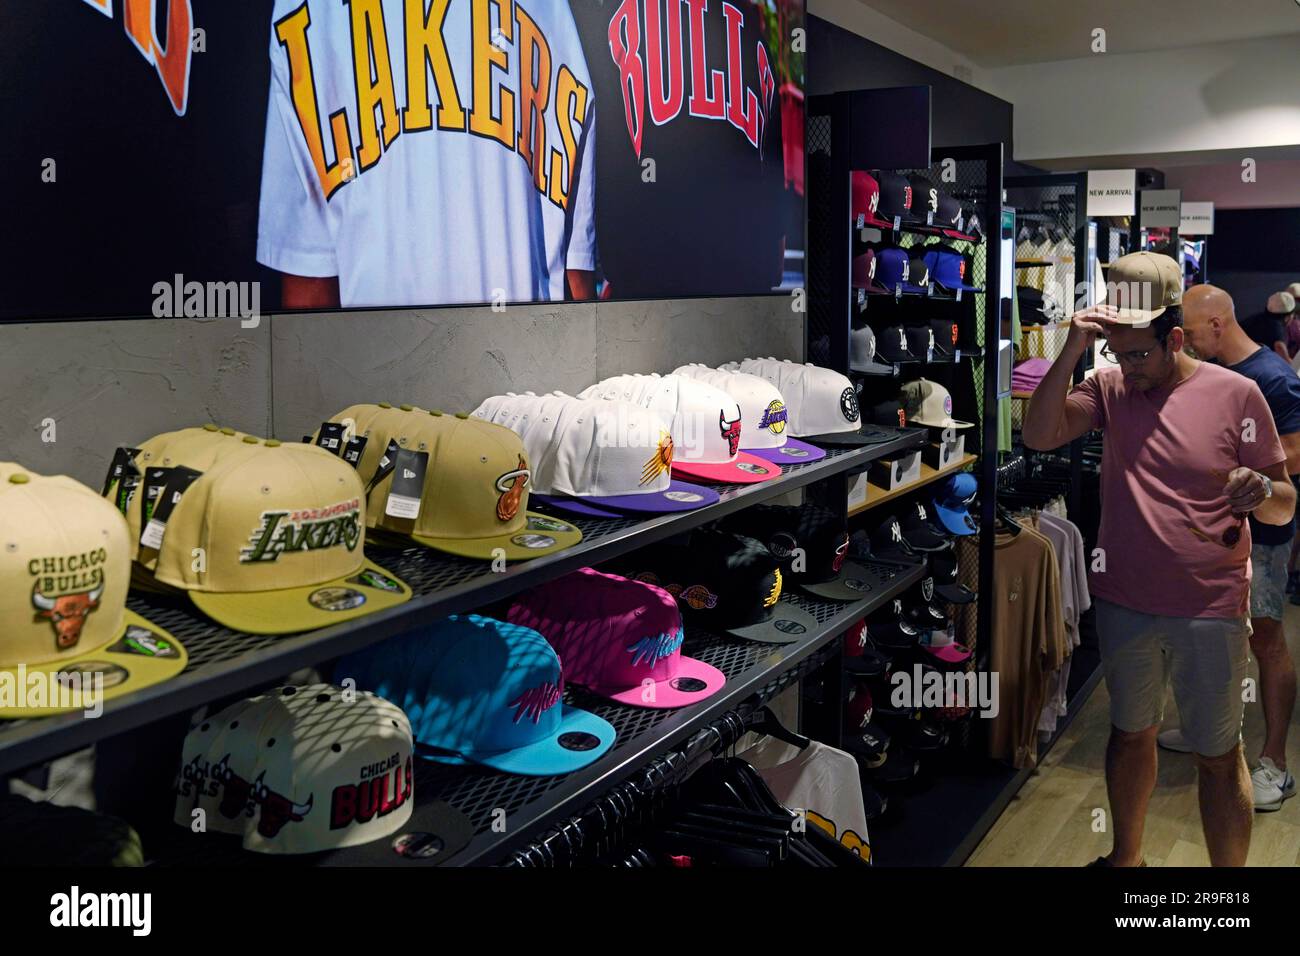 Caps are displayed for sale at a store in London, Thursday, June 15, 2023.  Major League Baseball wants to grow in Europe and is looking for ways to  connect with the local